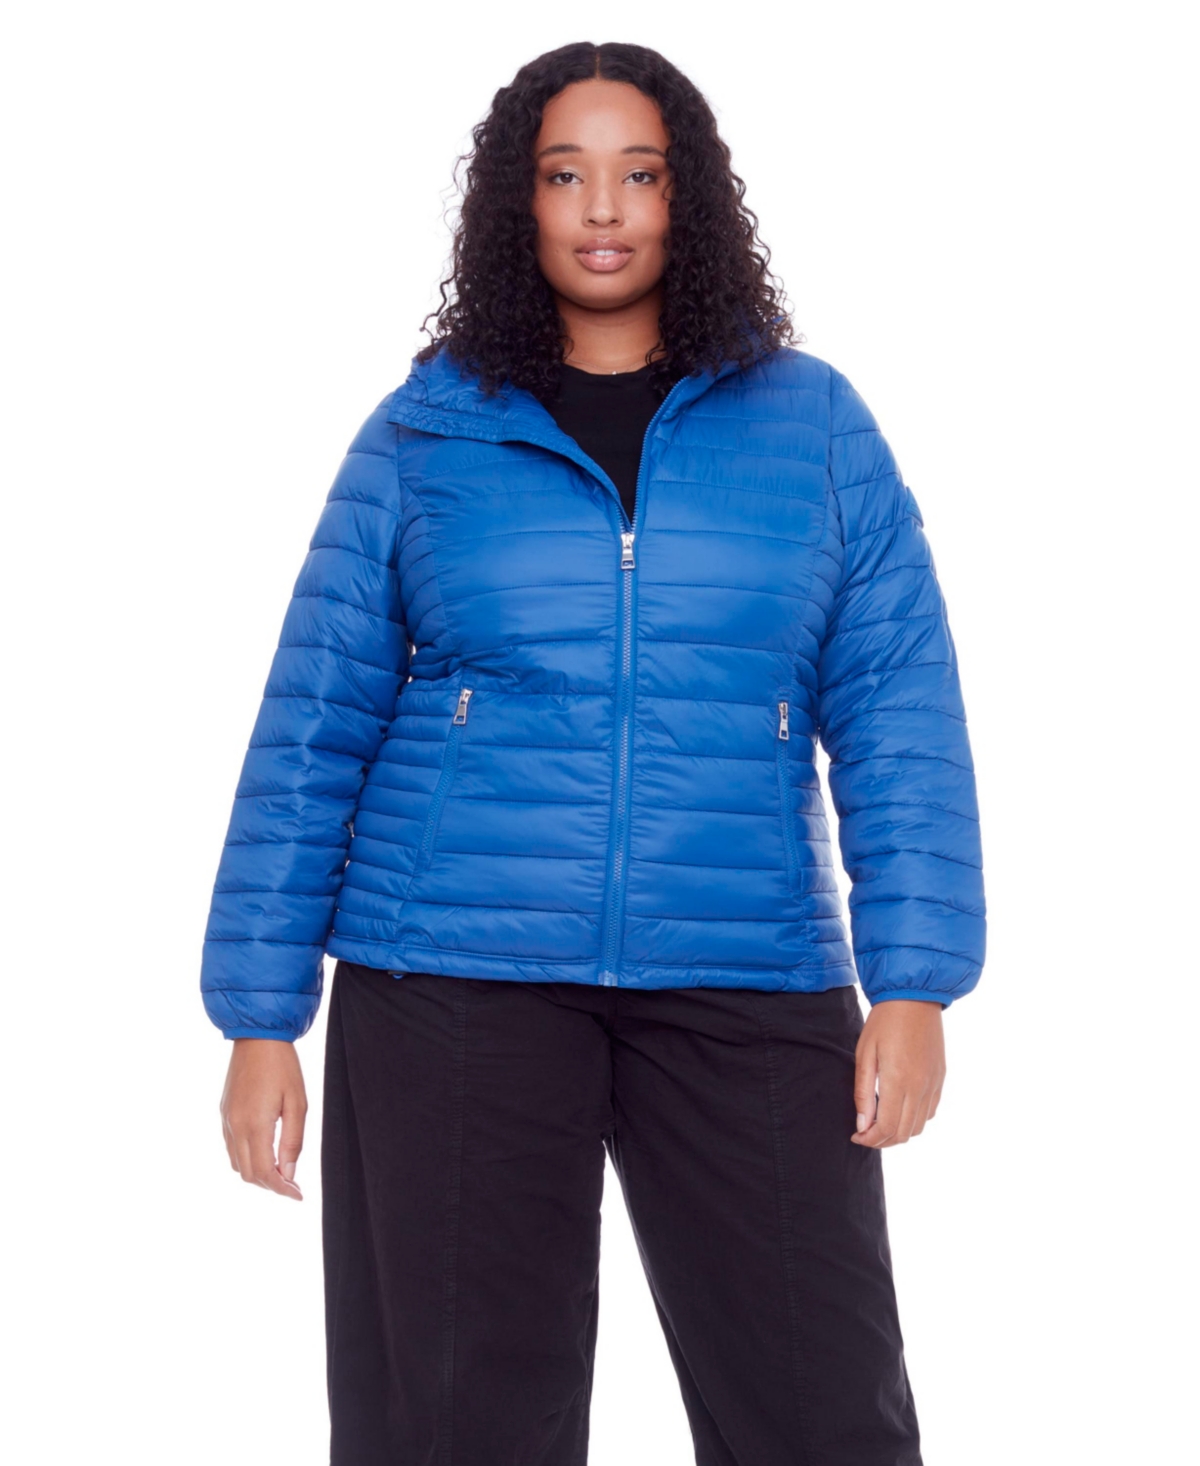 Plus Size Yoho Lightweight Packable Puffer Jacket & Bag - Taupe